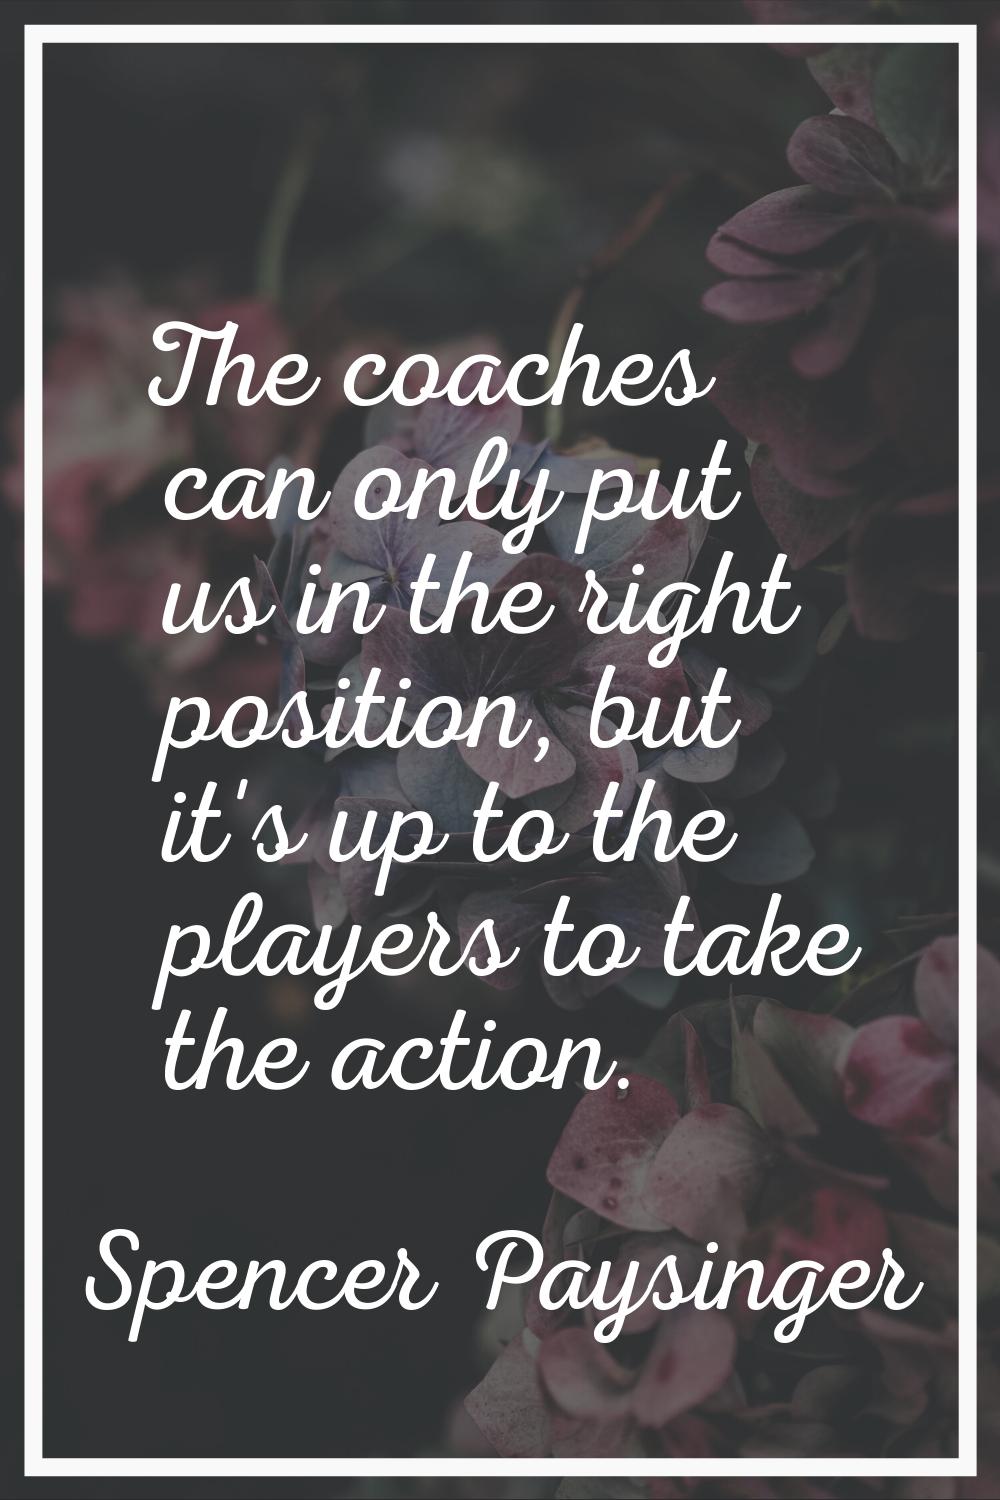 The coaches can only put us in the right position, but it's up to the players to take the action.